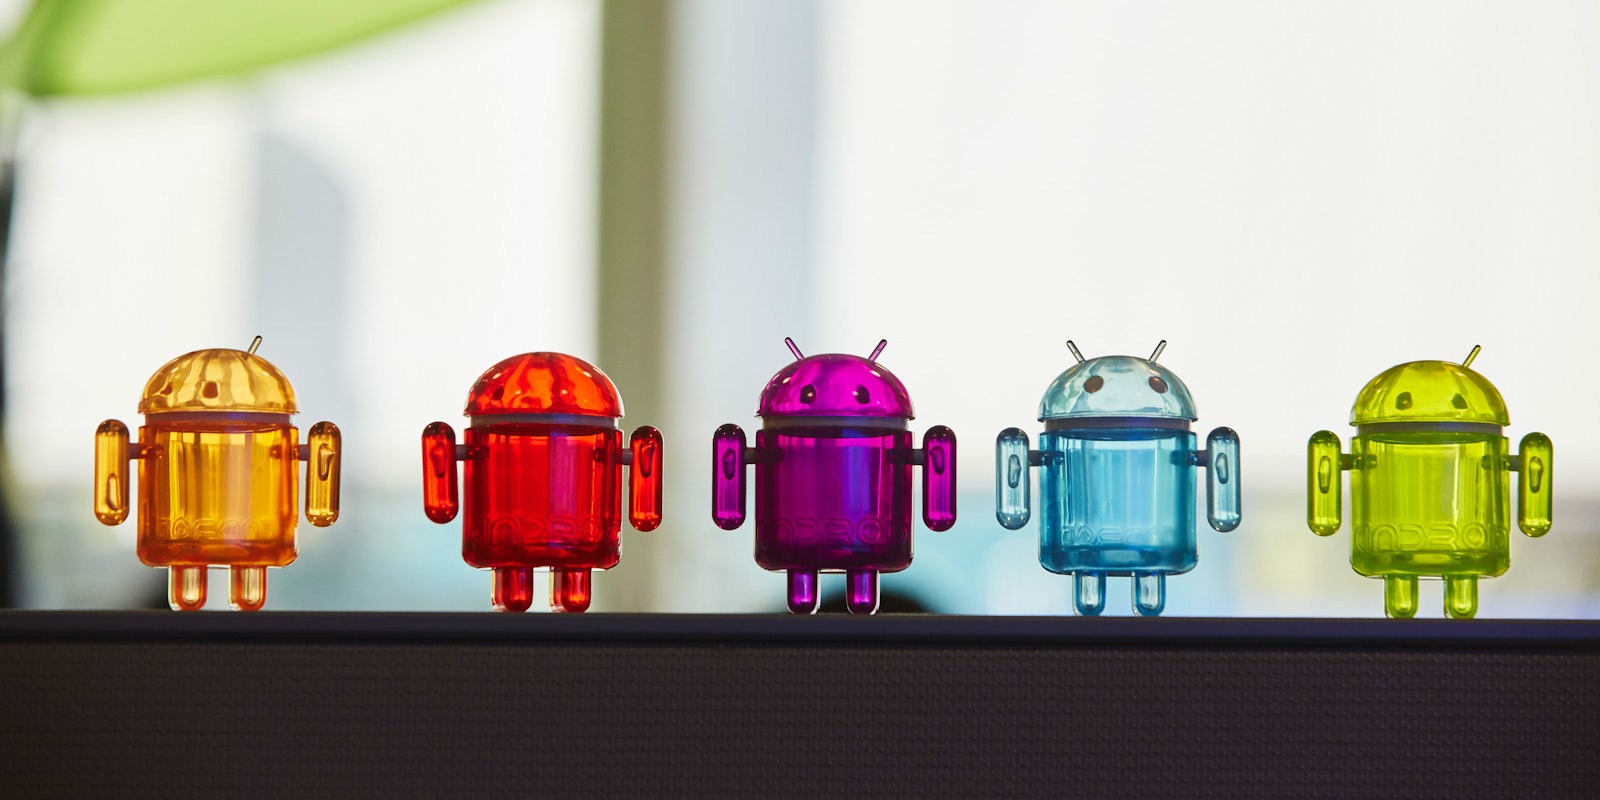 best android features : Five Android figurines in a row